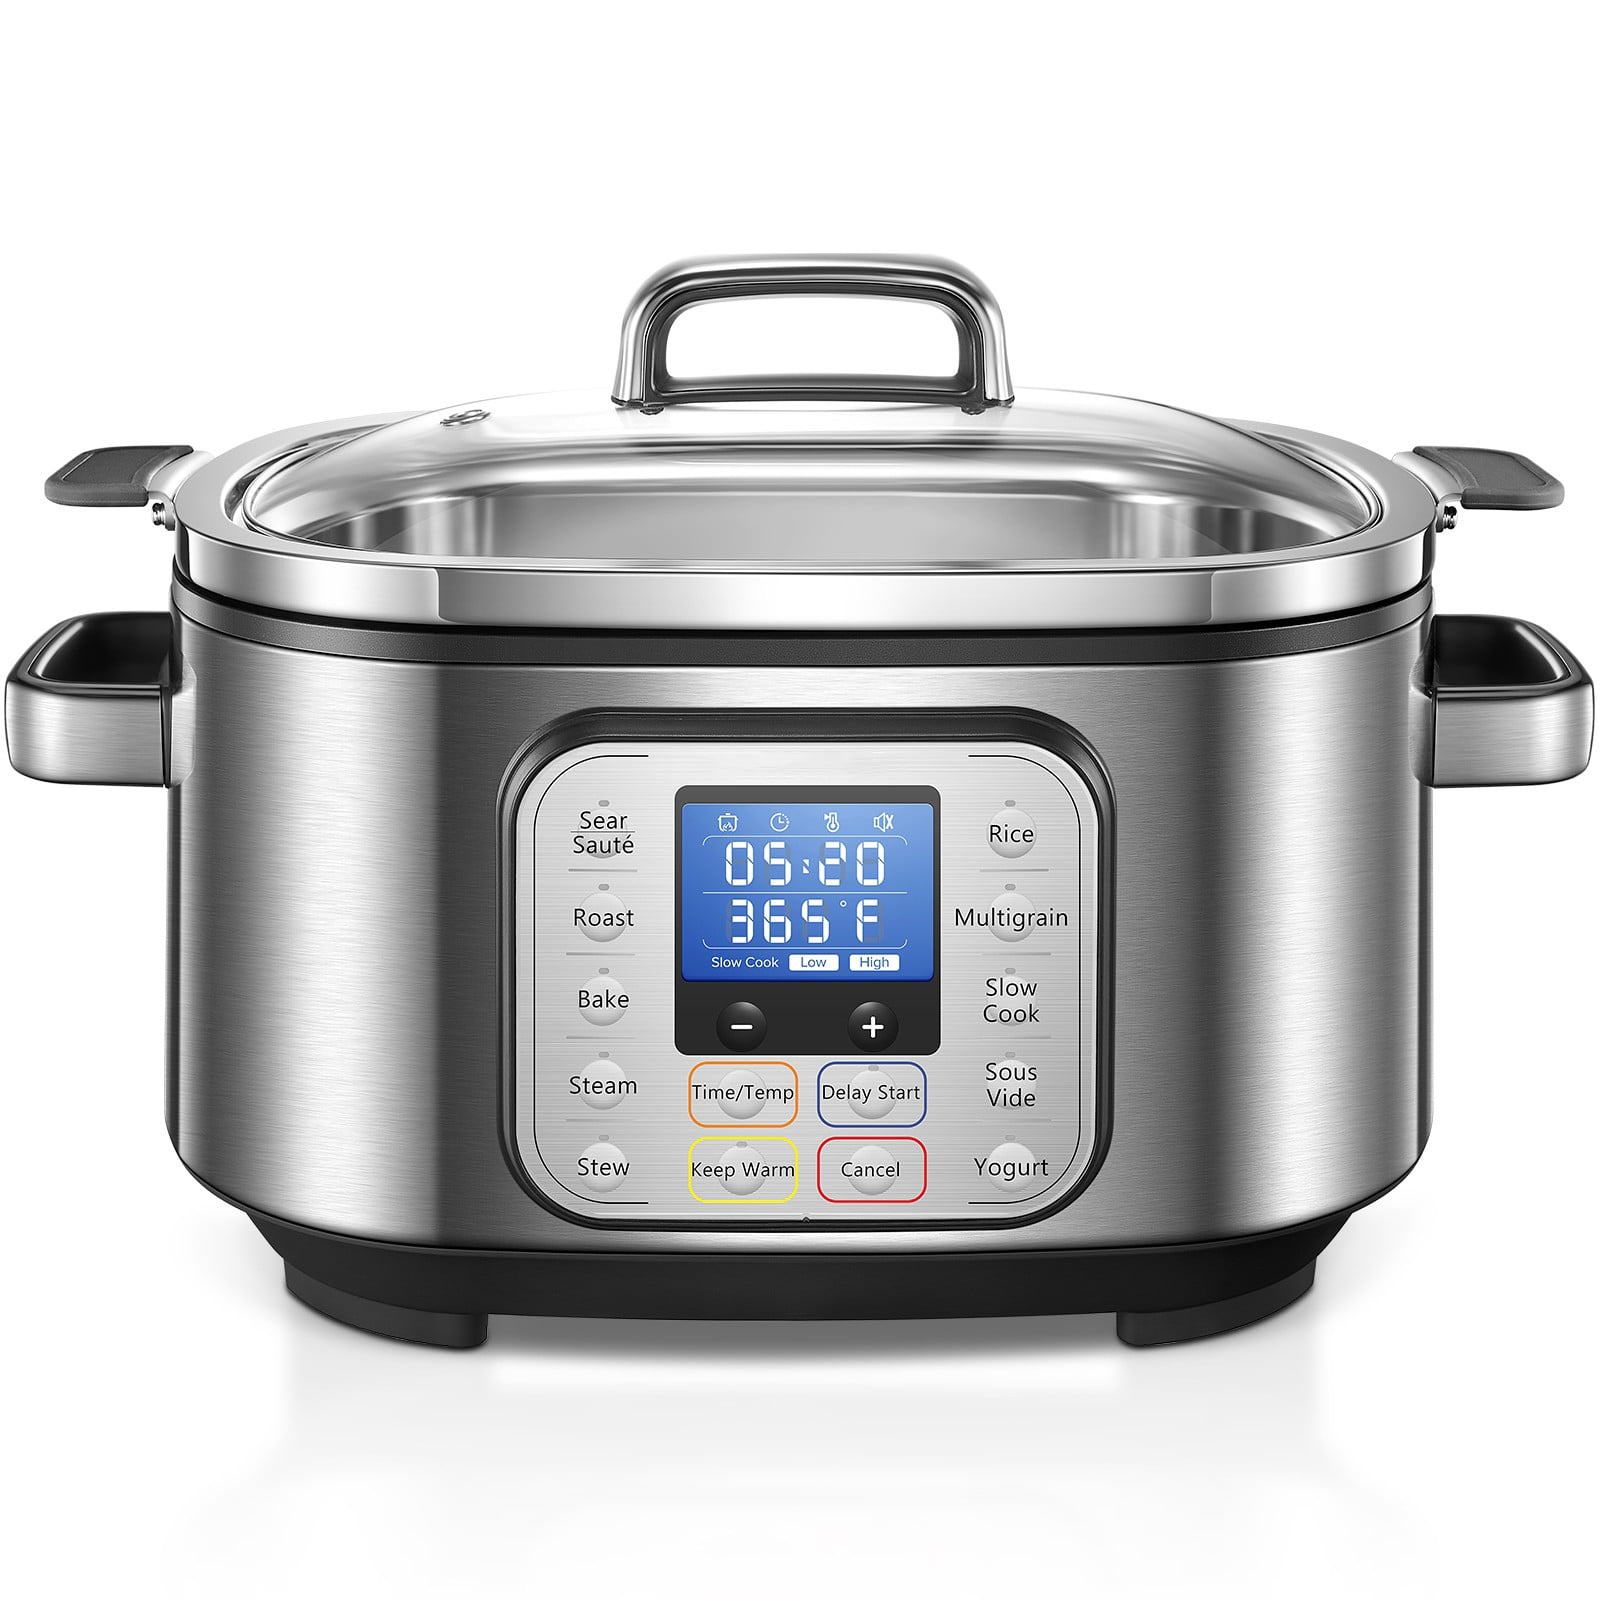 Delay Timer for Slow Cooker: NOT Worth the Risk